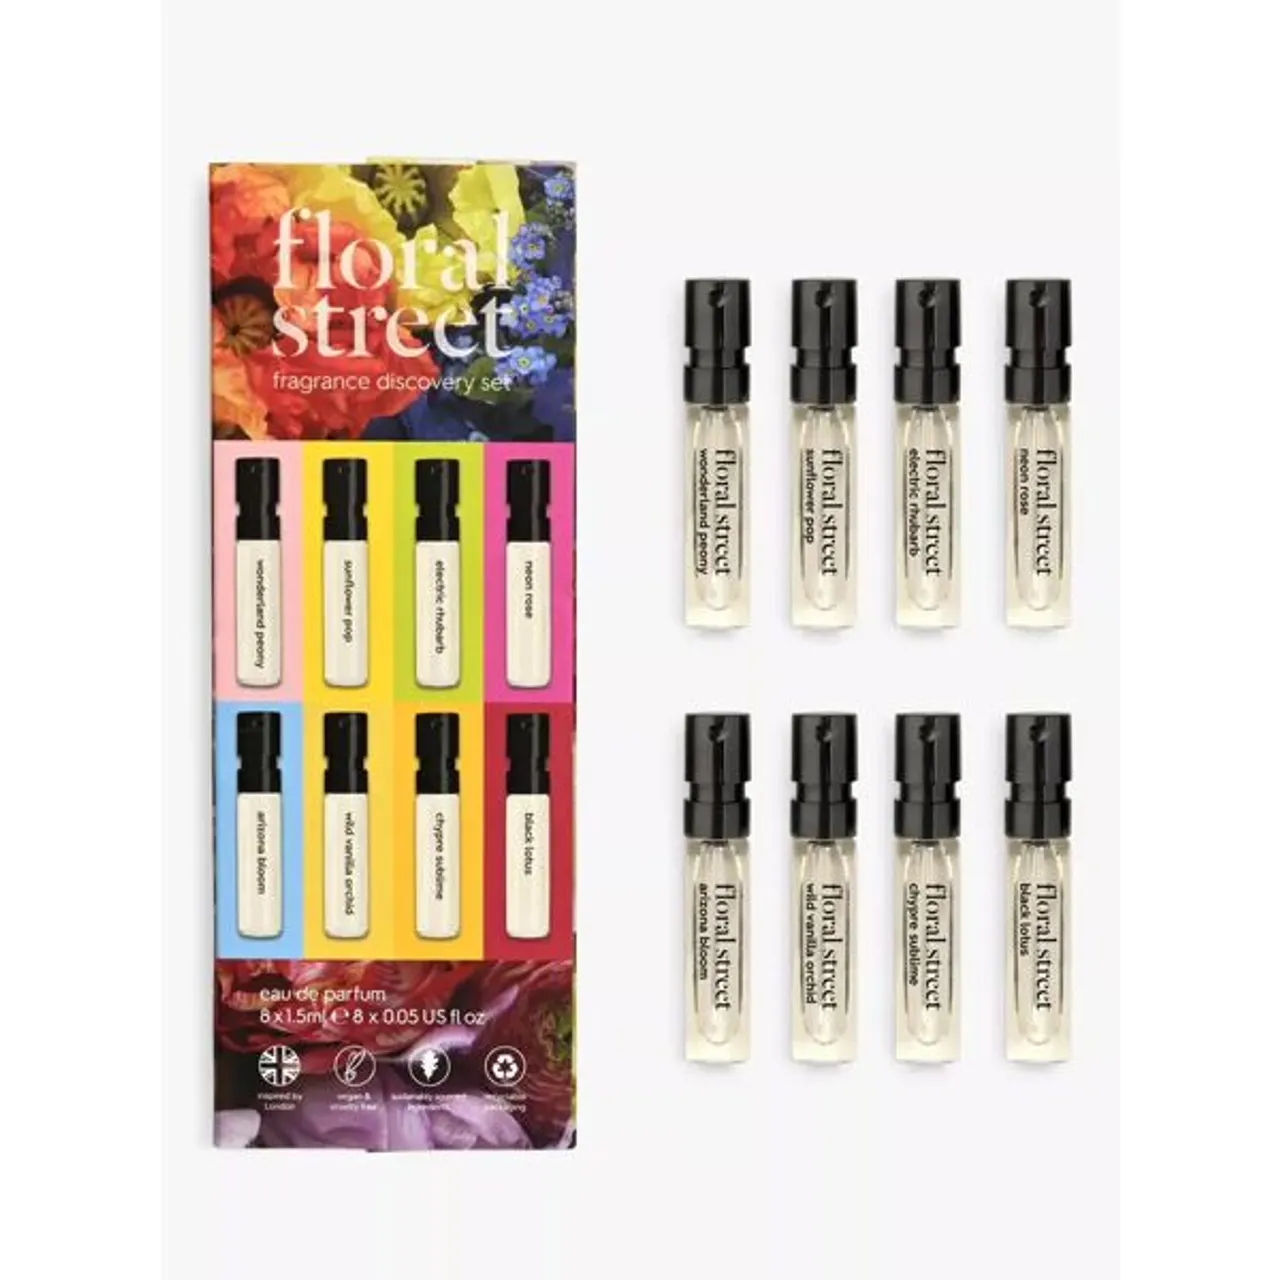 Floral Street Fragrance Discovery Gift Set - Unisex